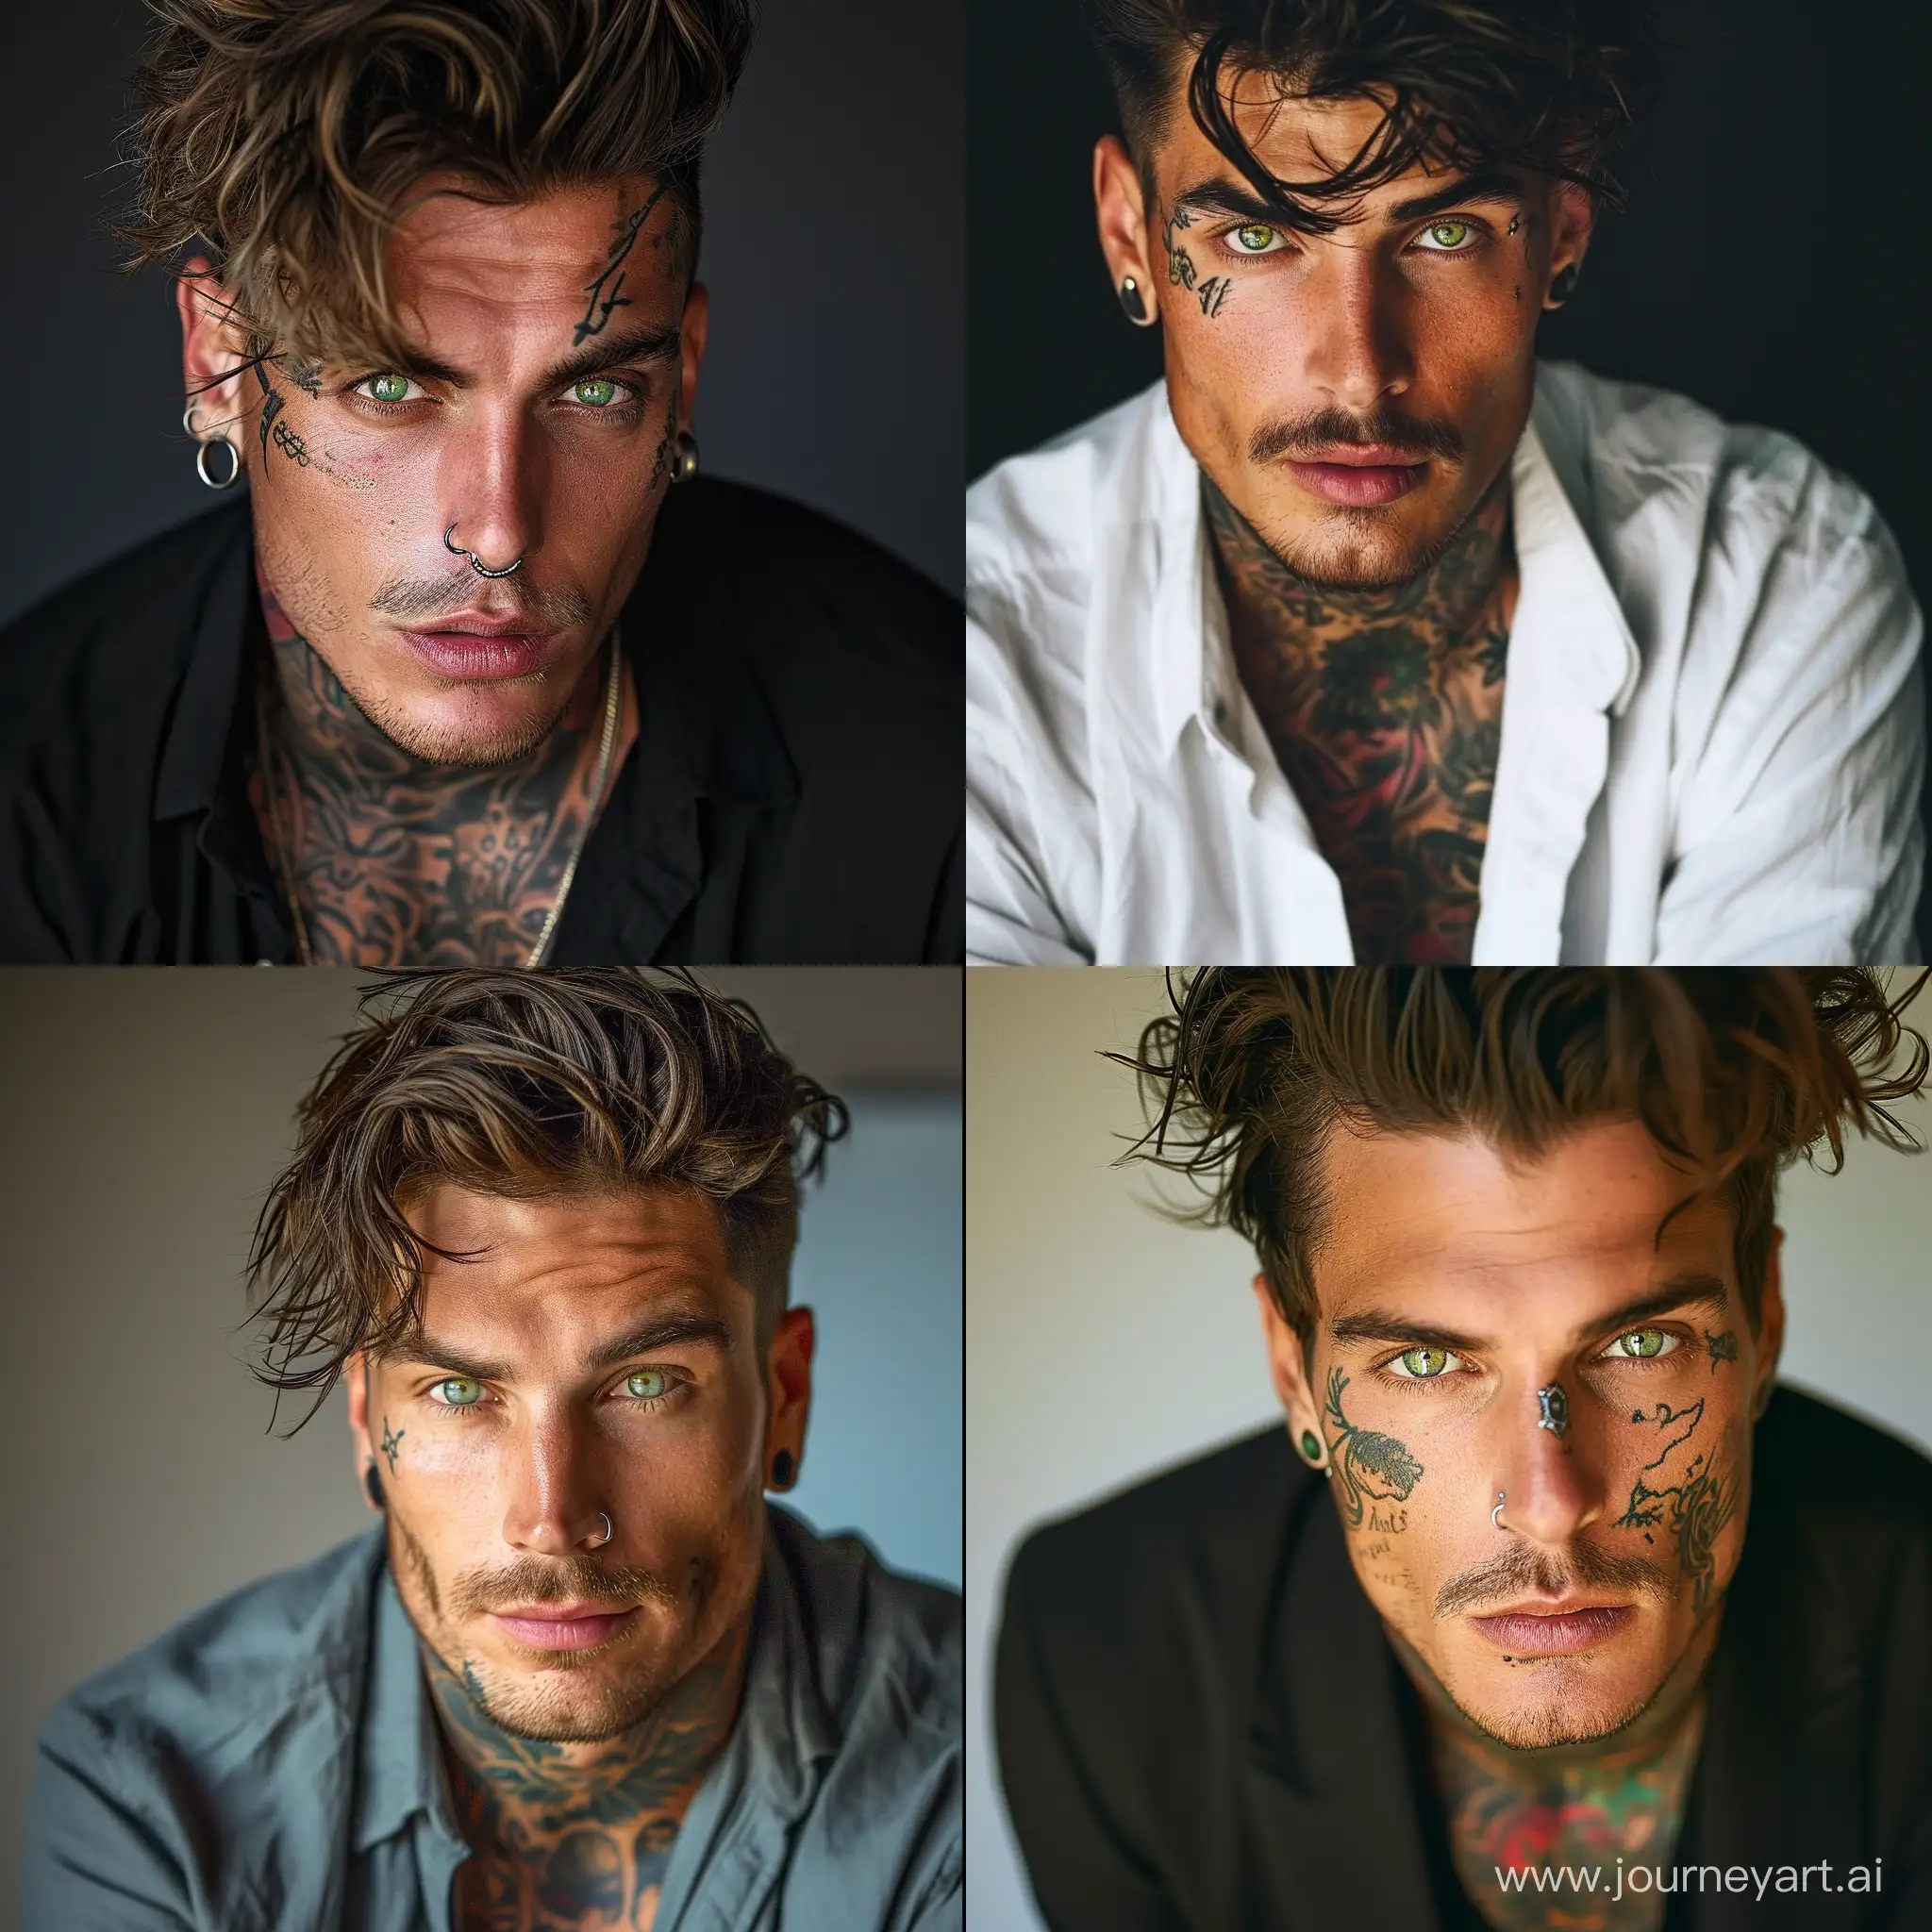 Stylish-Man-with-Fashionable-Dress-Tattoos-and-Green-Eyes